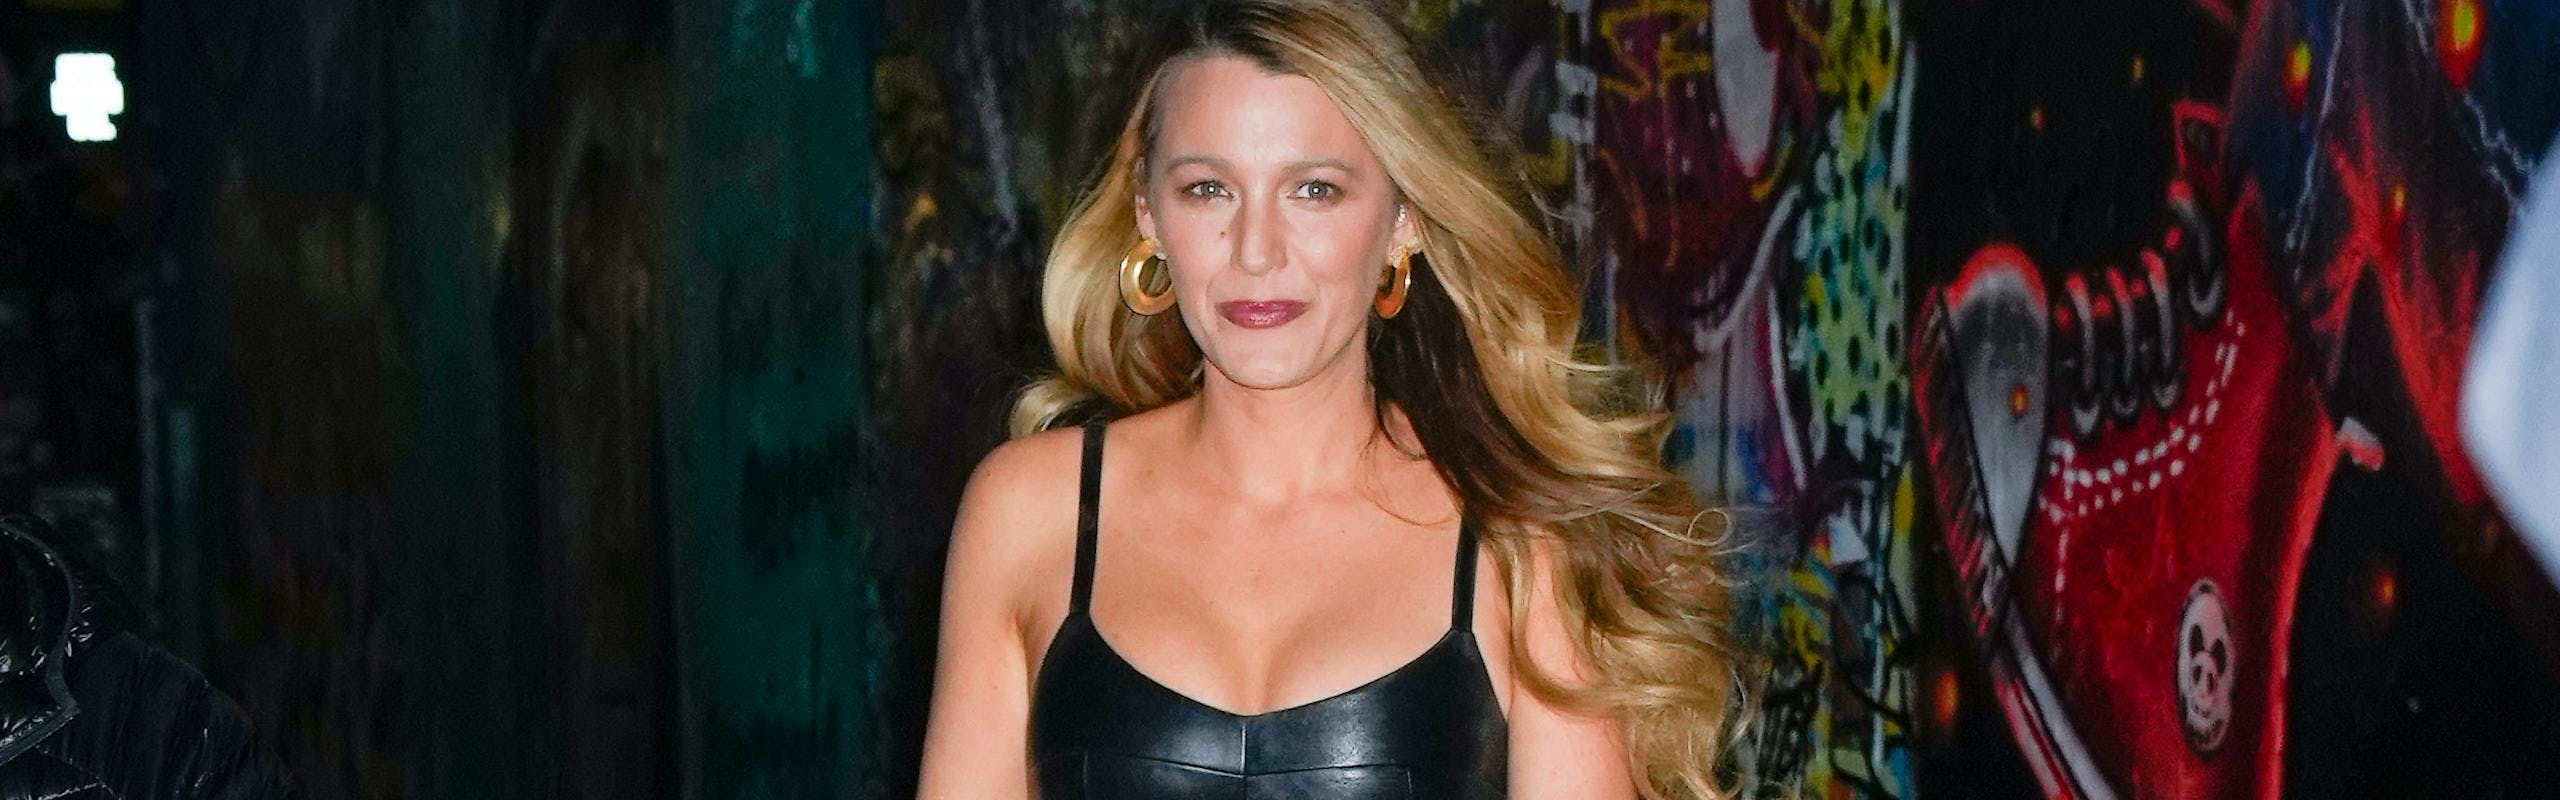 blake lively walking down street at night wearing leather dress and gold jewelry